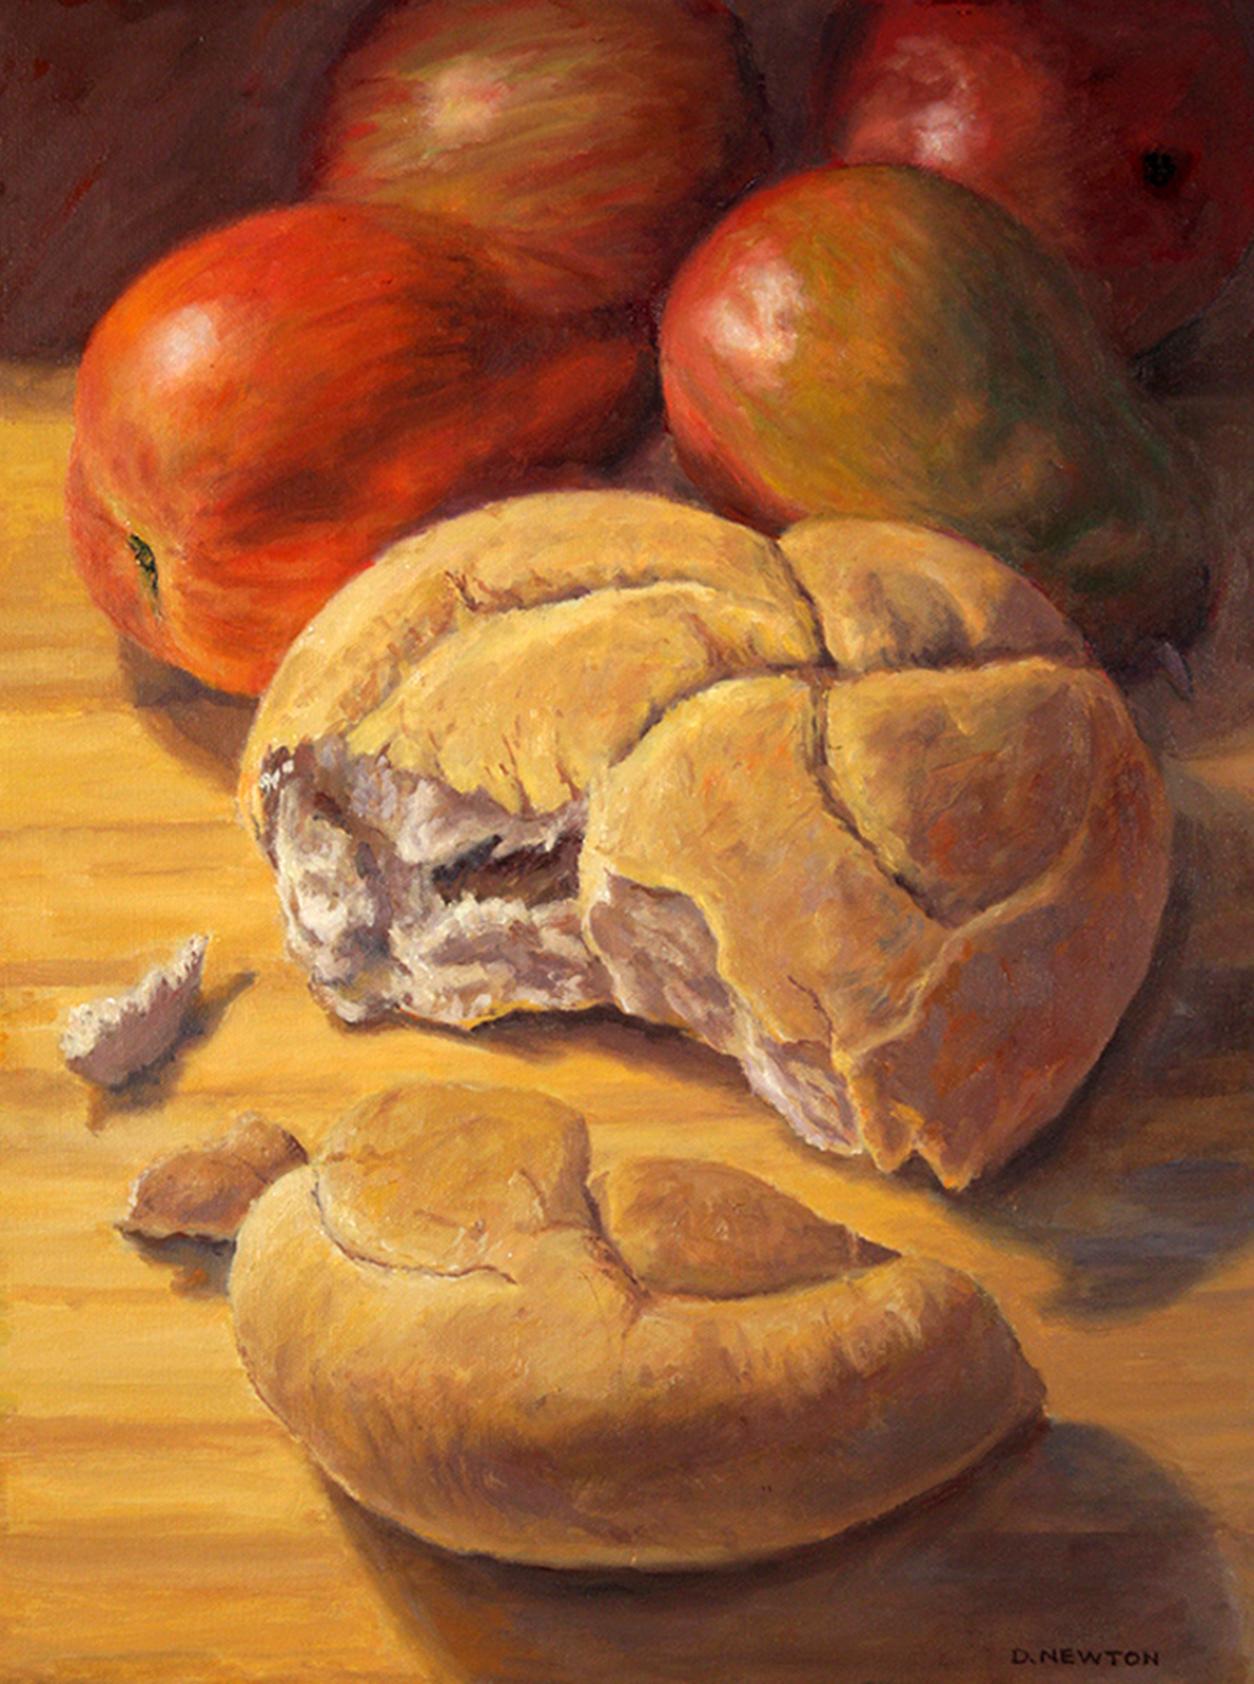 Douglas Newton Animal Painting - Bread and Pears super realism, colorful, object, traditional still life 